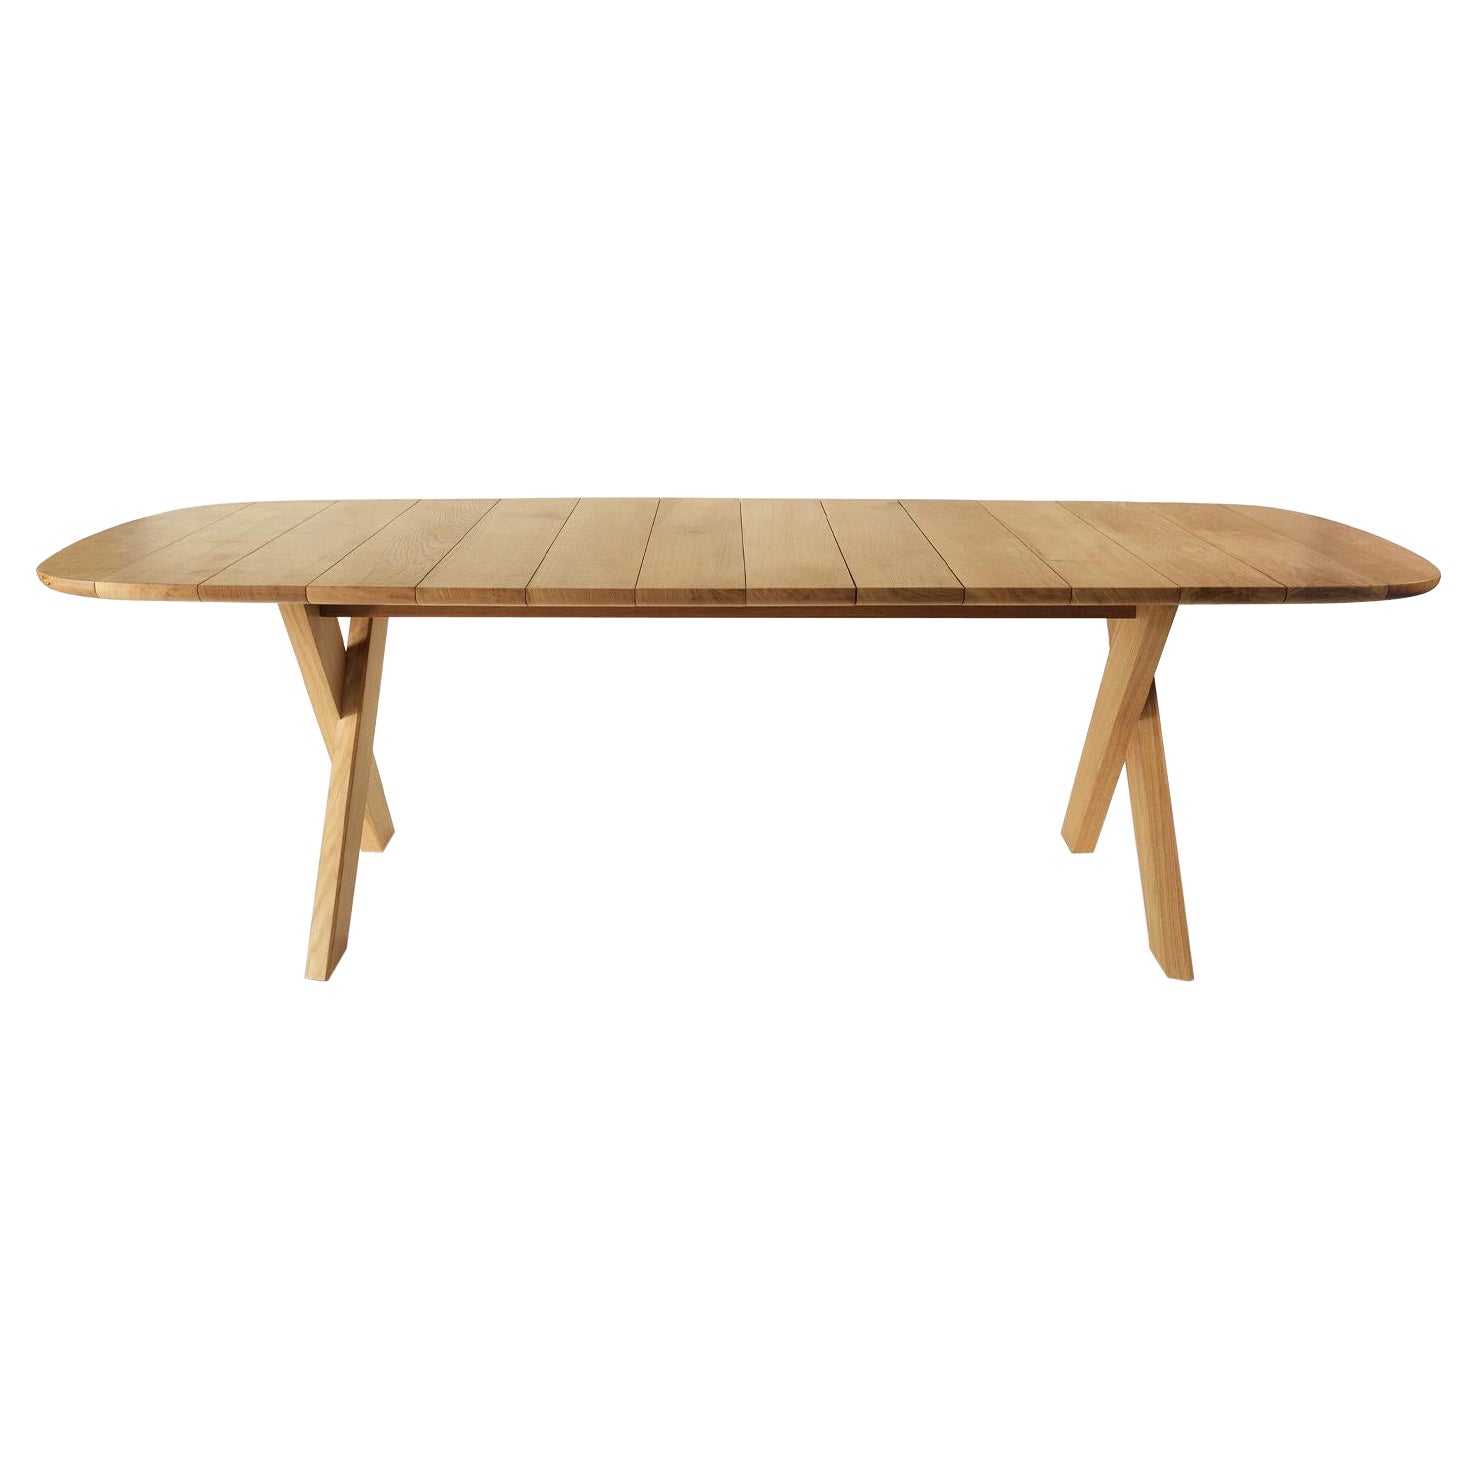 Paco Wood Dining Table by Terry Dwan, Made in Italy